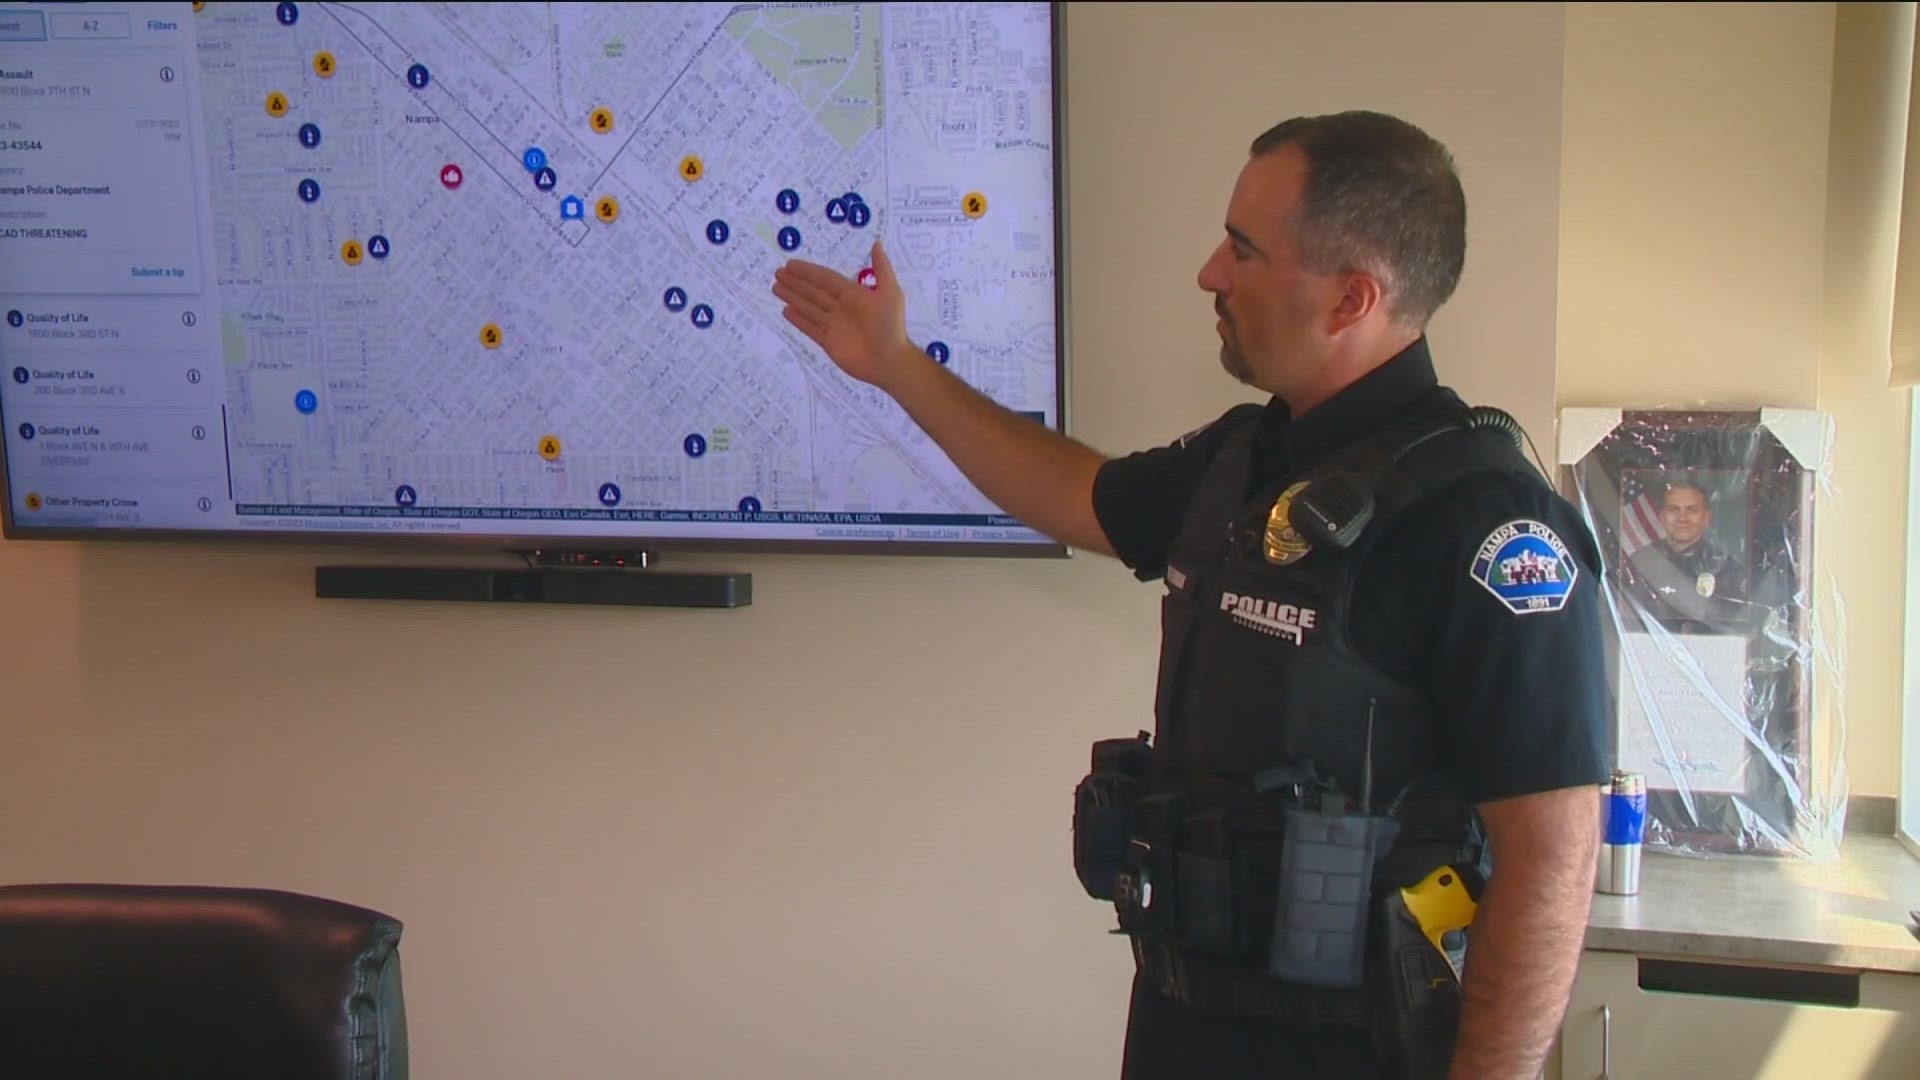 The map includes crime data, such as reported incidents and area trends, and each incident includes a link to CrimeStoppers.